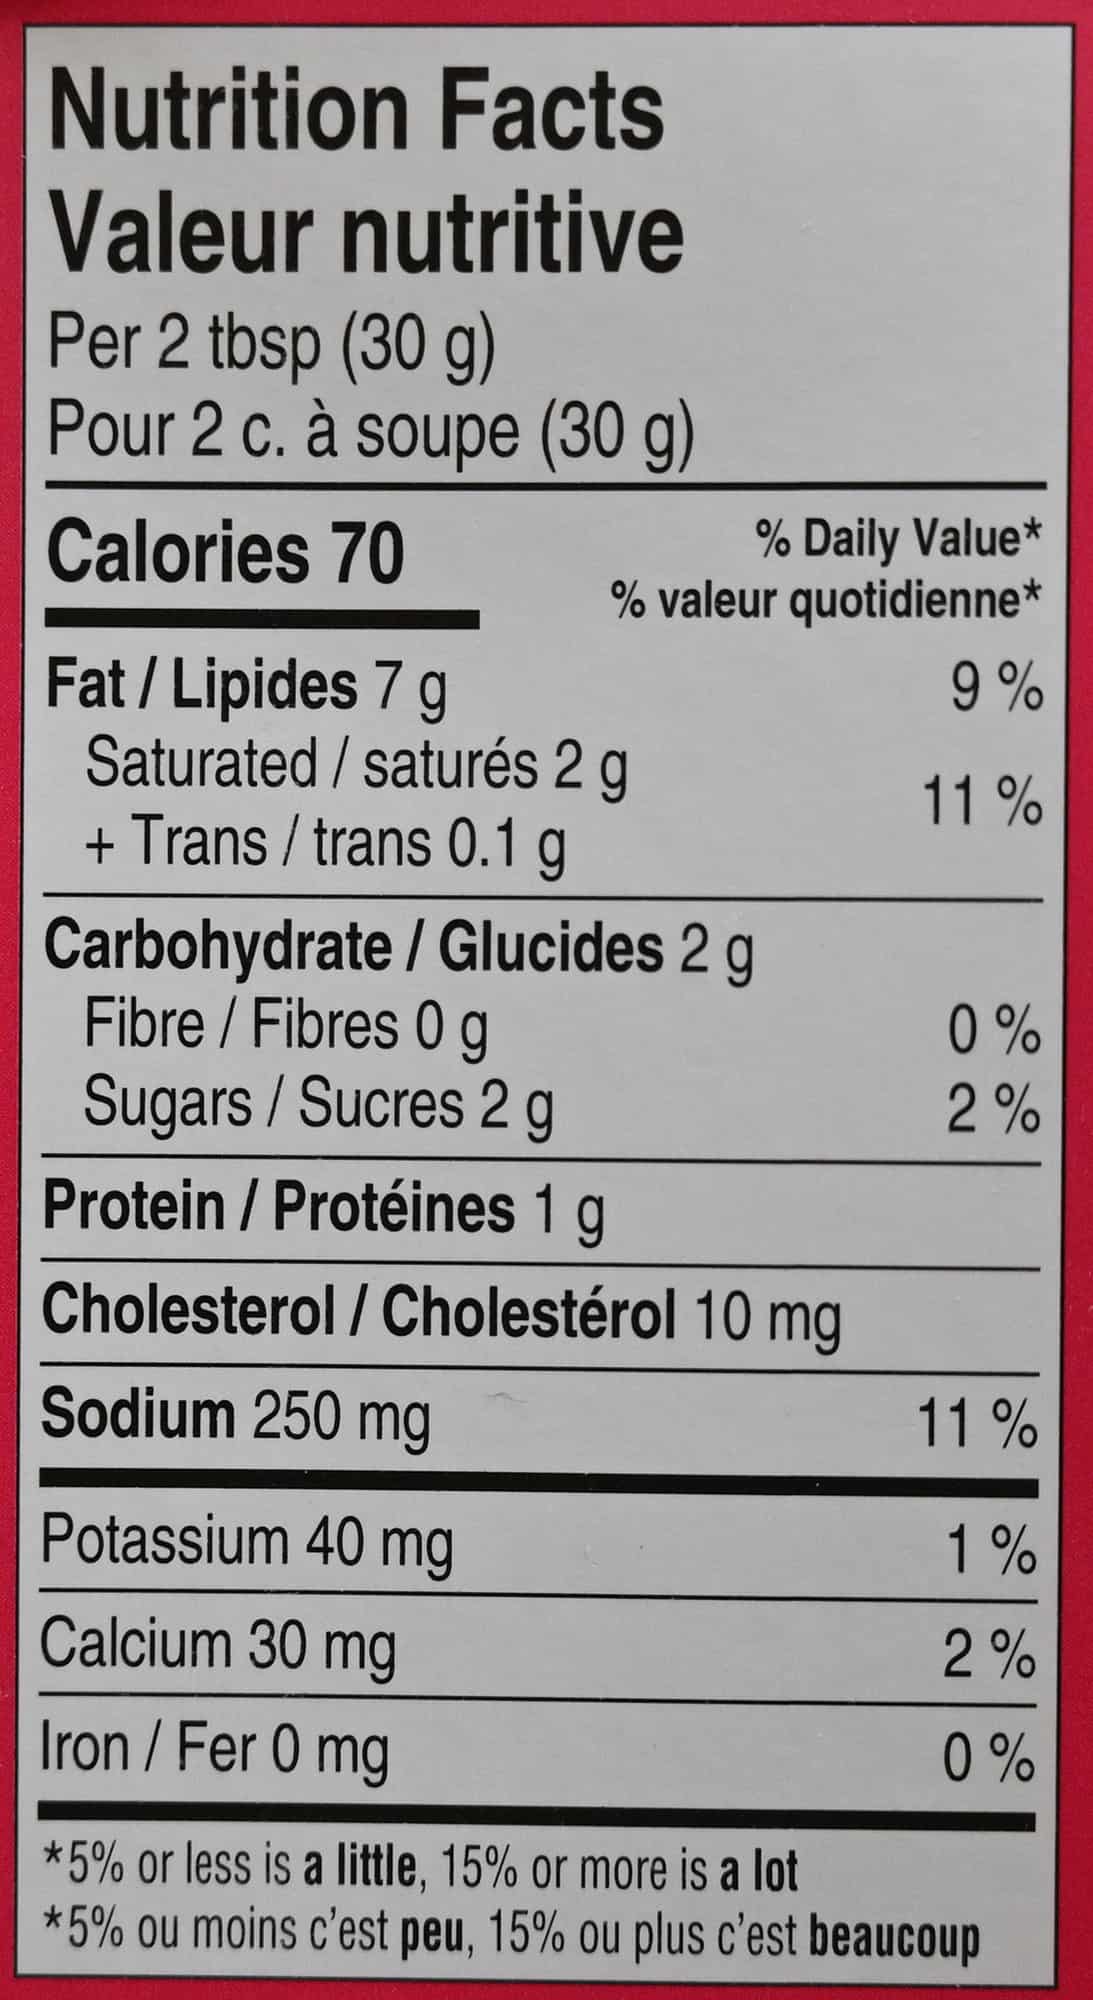 Image of the nutrition facts for the dip from the packaging.